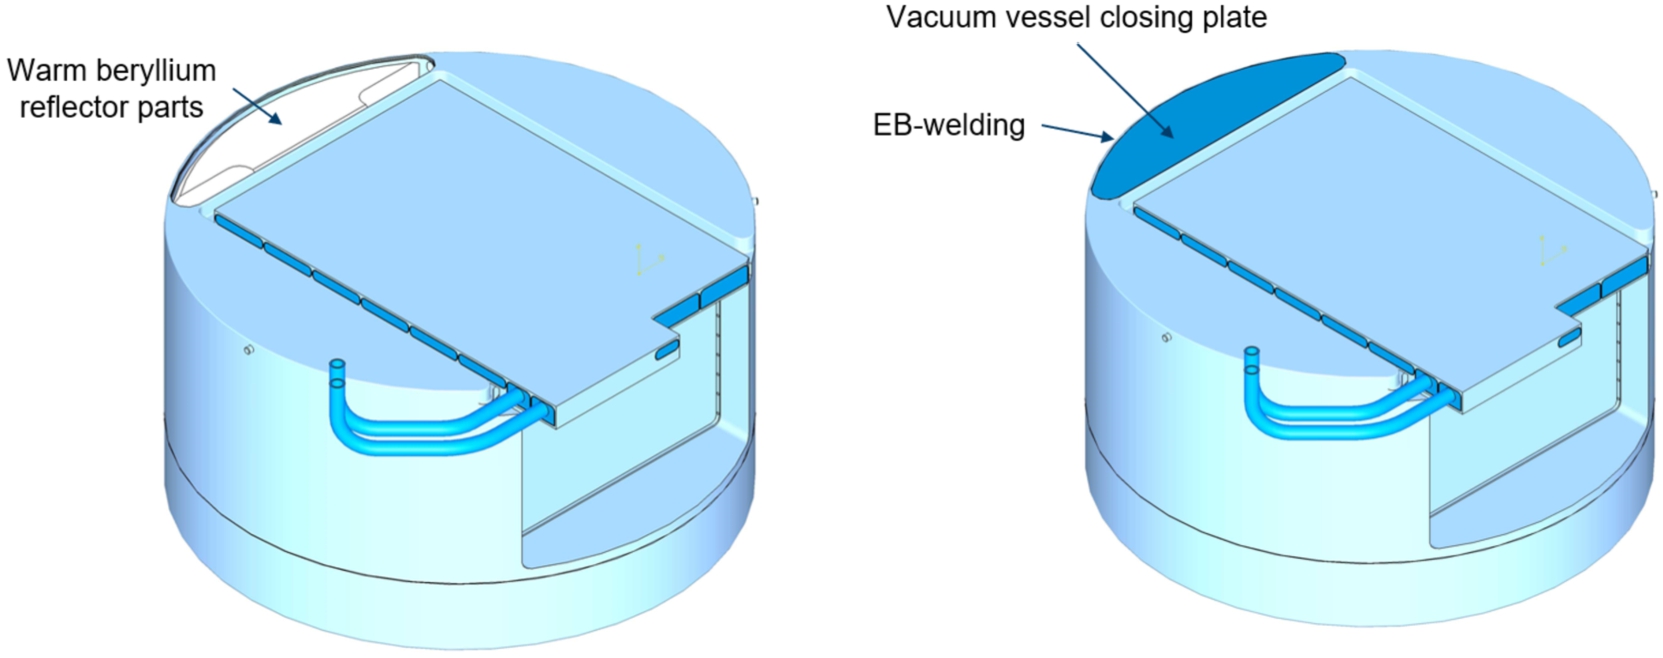 Assembly and EB-welding of the vacuum vessel (Be reflector segment above WP7 window A).